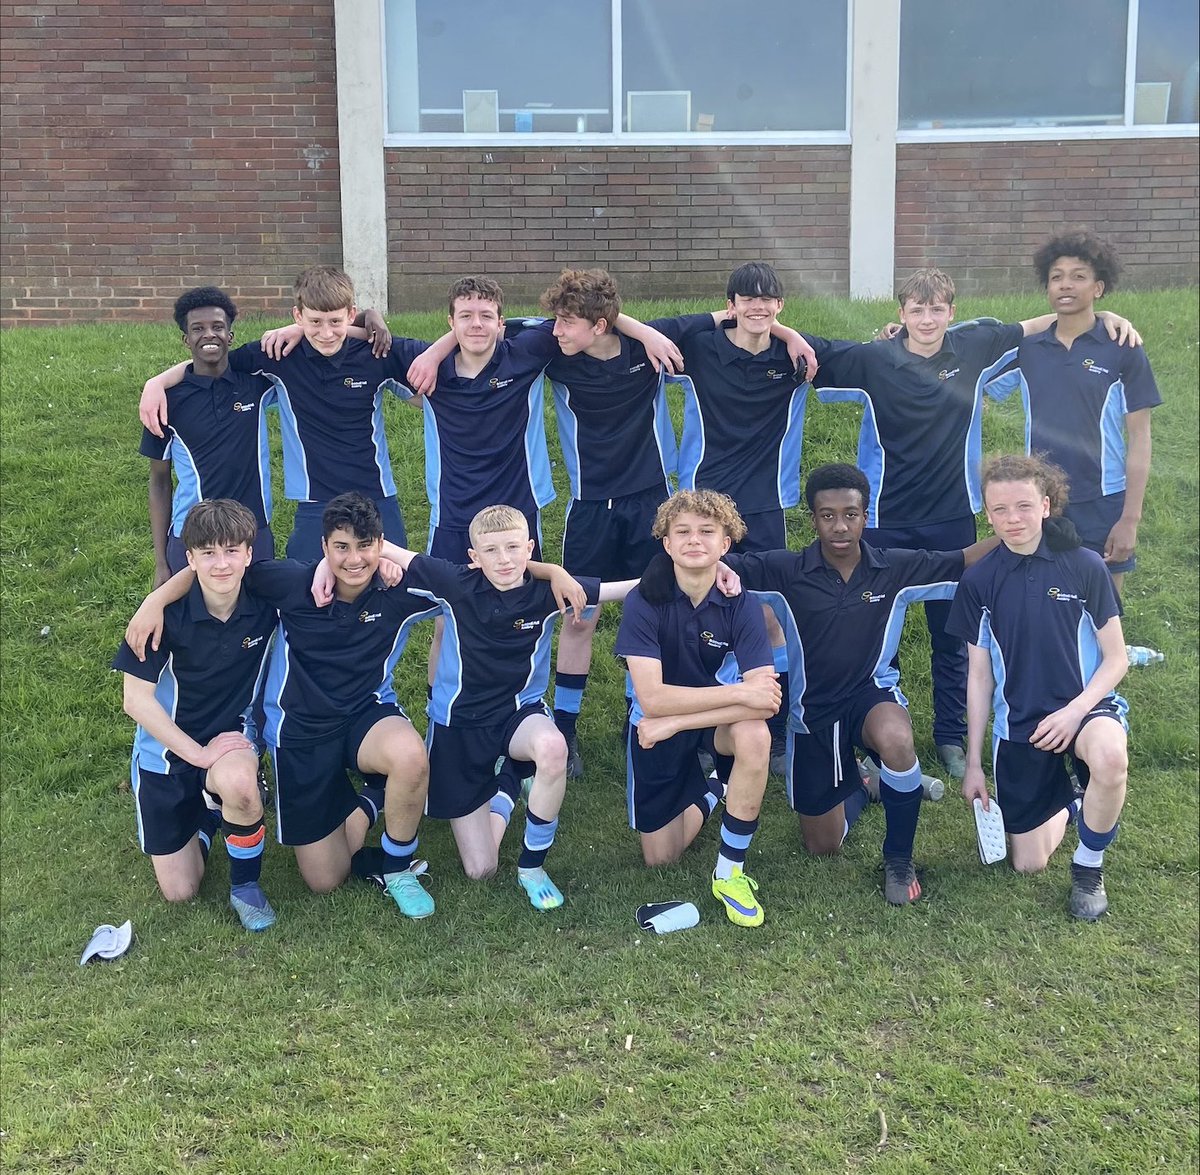 A huge well done to our incredible Year 9 football team who secured a 6-1 win this evening and now move to the quarter finals of the Sandwell Cup! Fantastic goals from Joel, Liam, Seth and Riley - well done! #proud #extracurricular #inaclassofourown